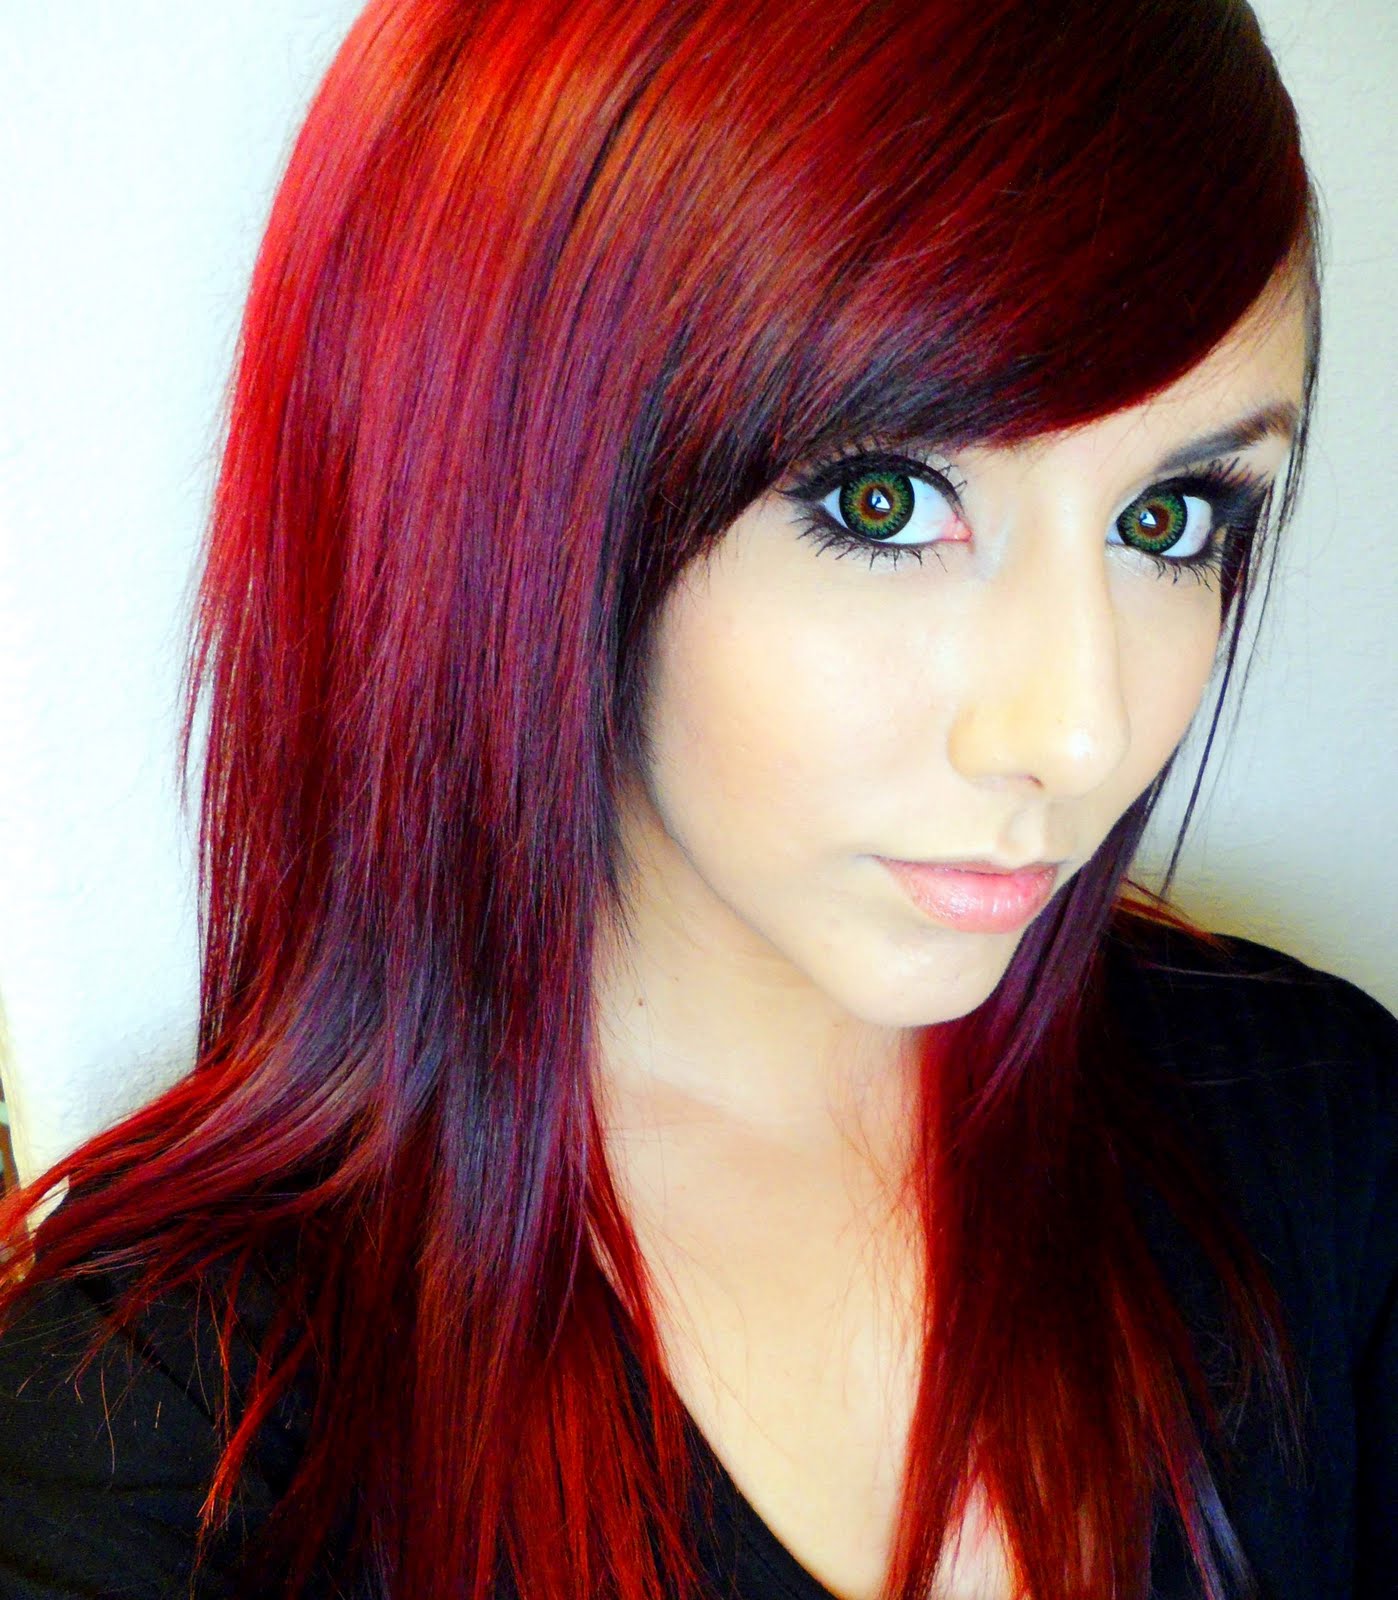 Technicolor: My Hair Color - How To Get Dark Red Hair!!